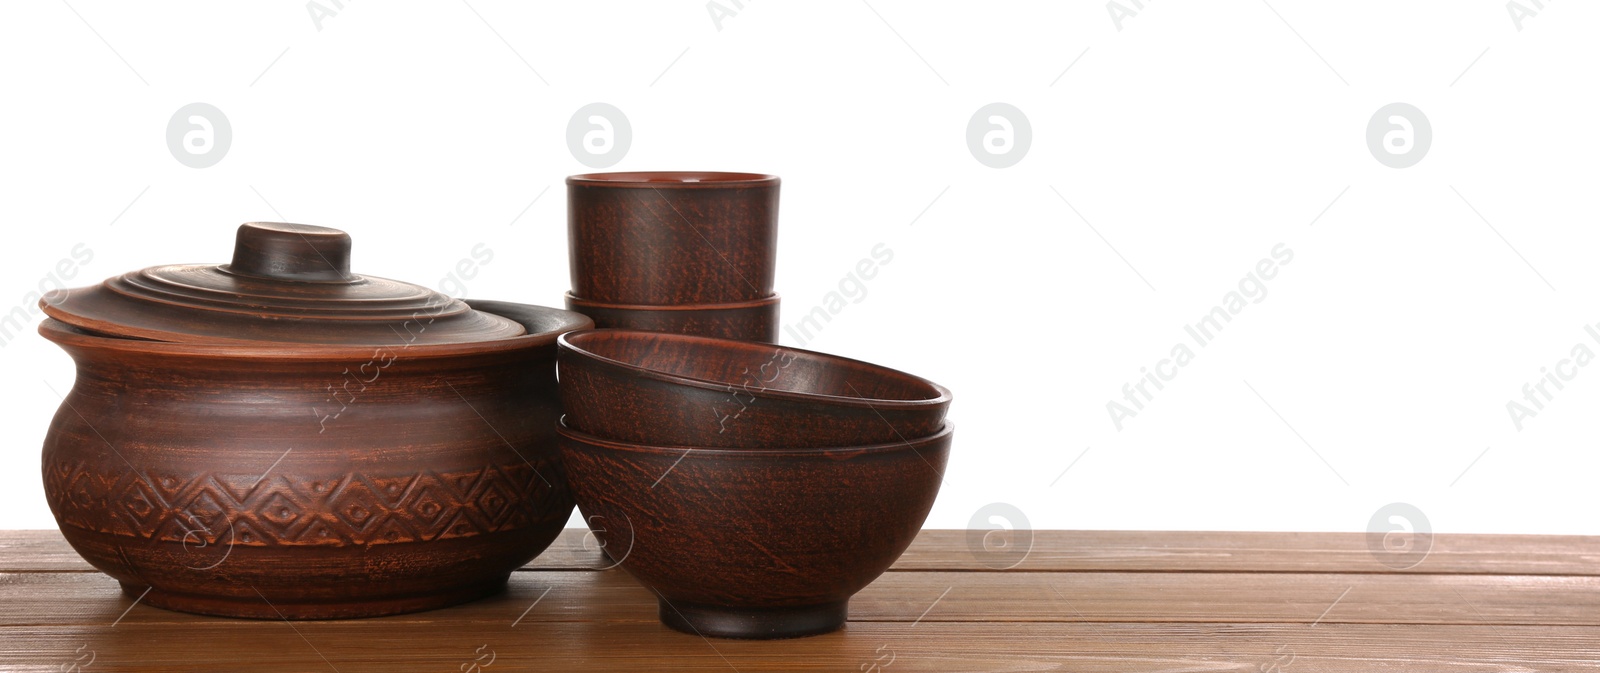 Photo of Set of stylish clay dishes on wooden table against white background. Space for text